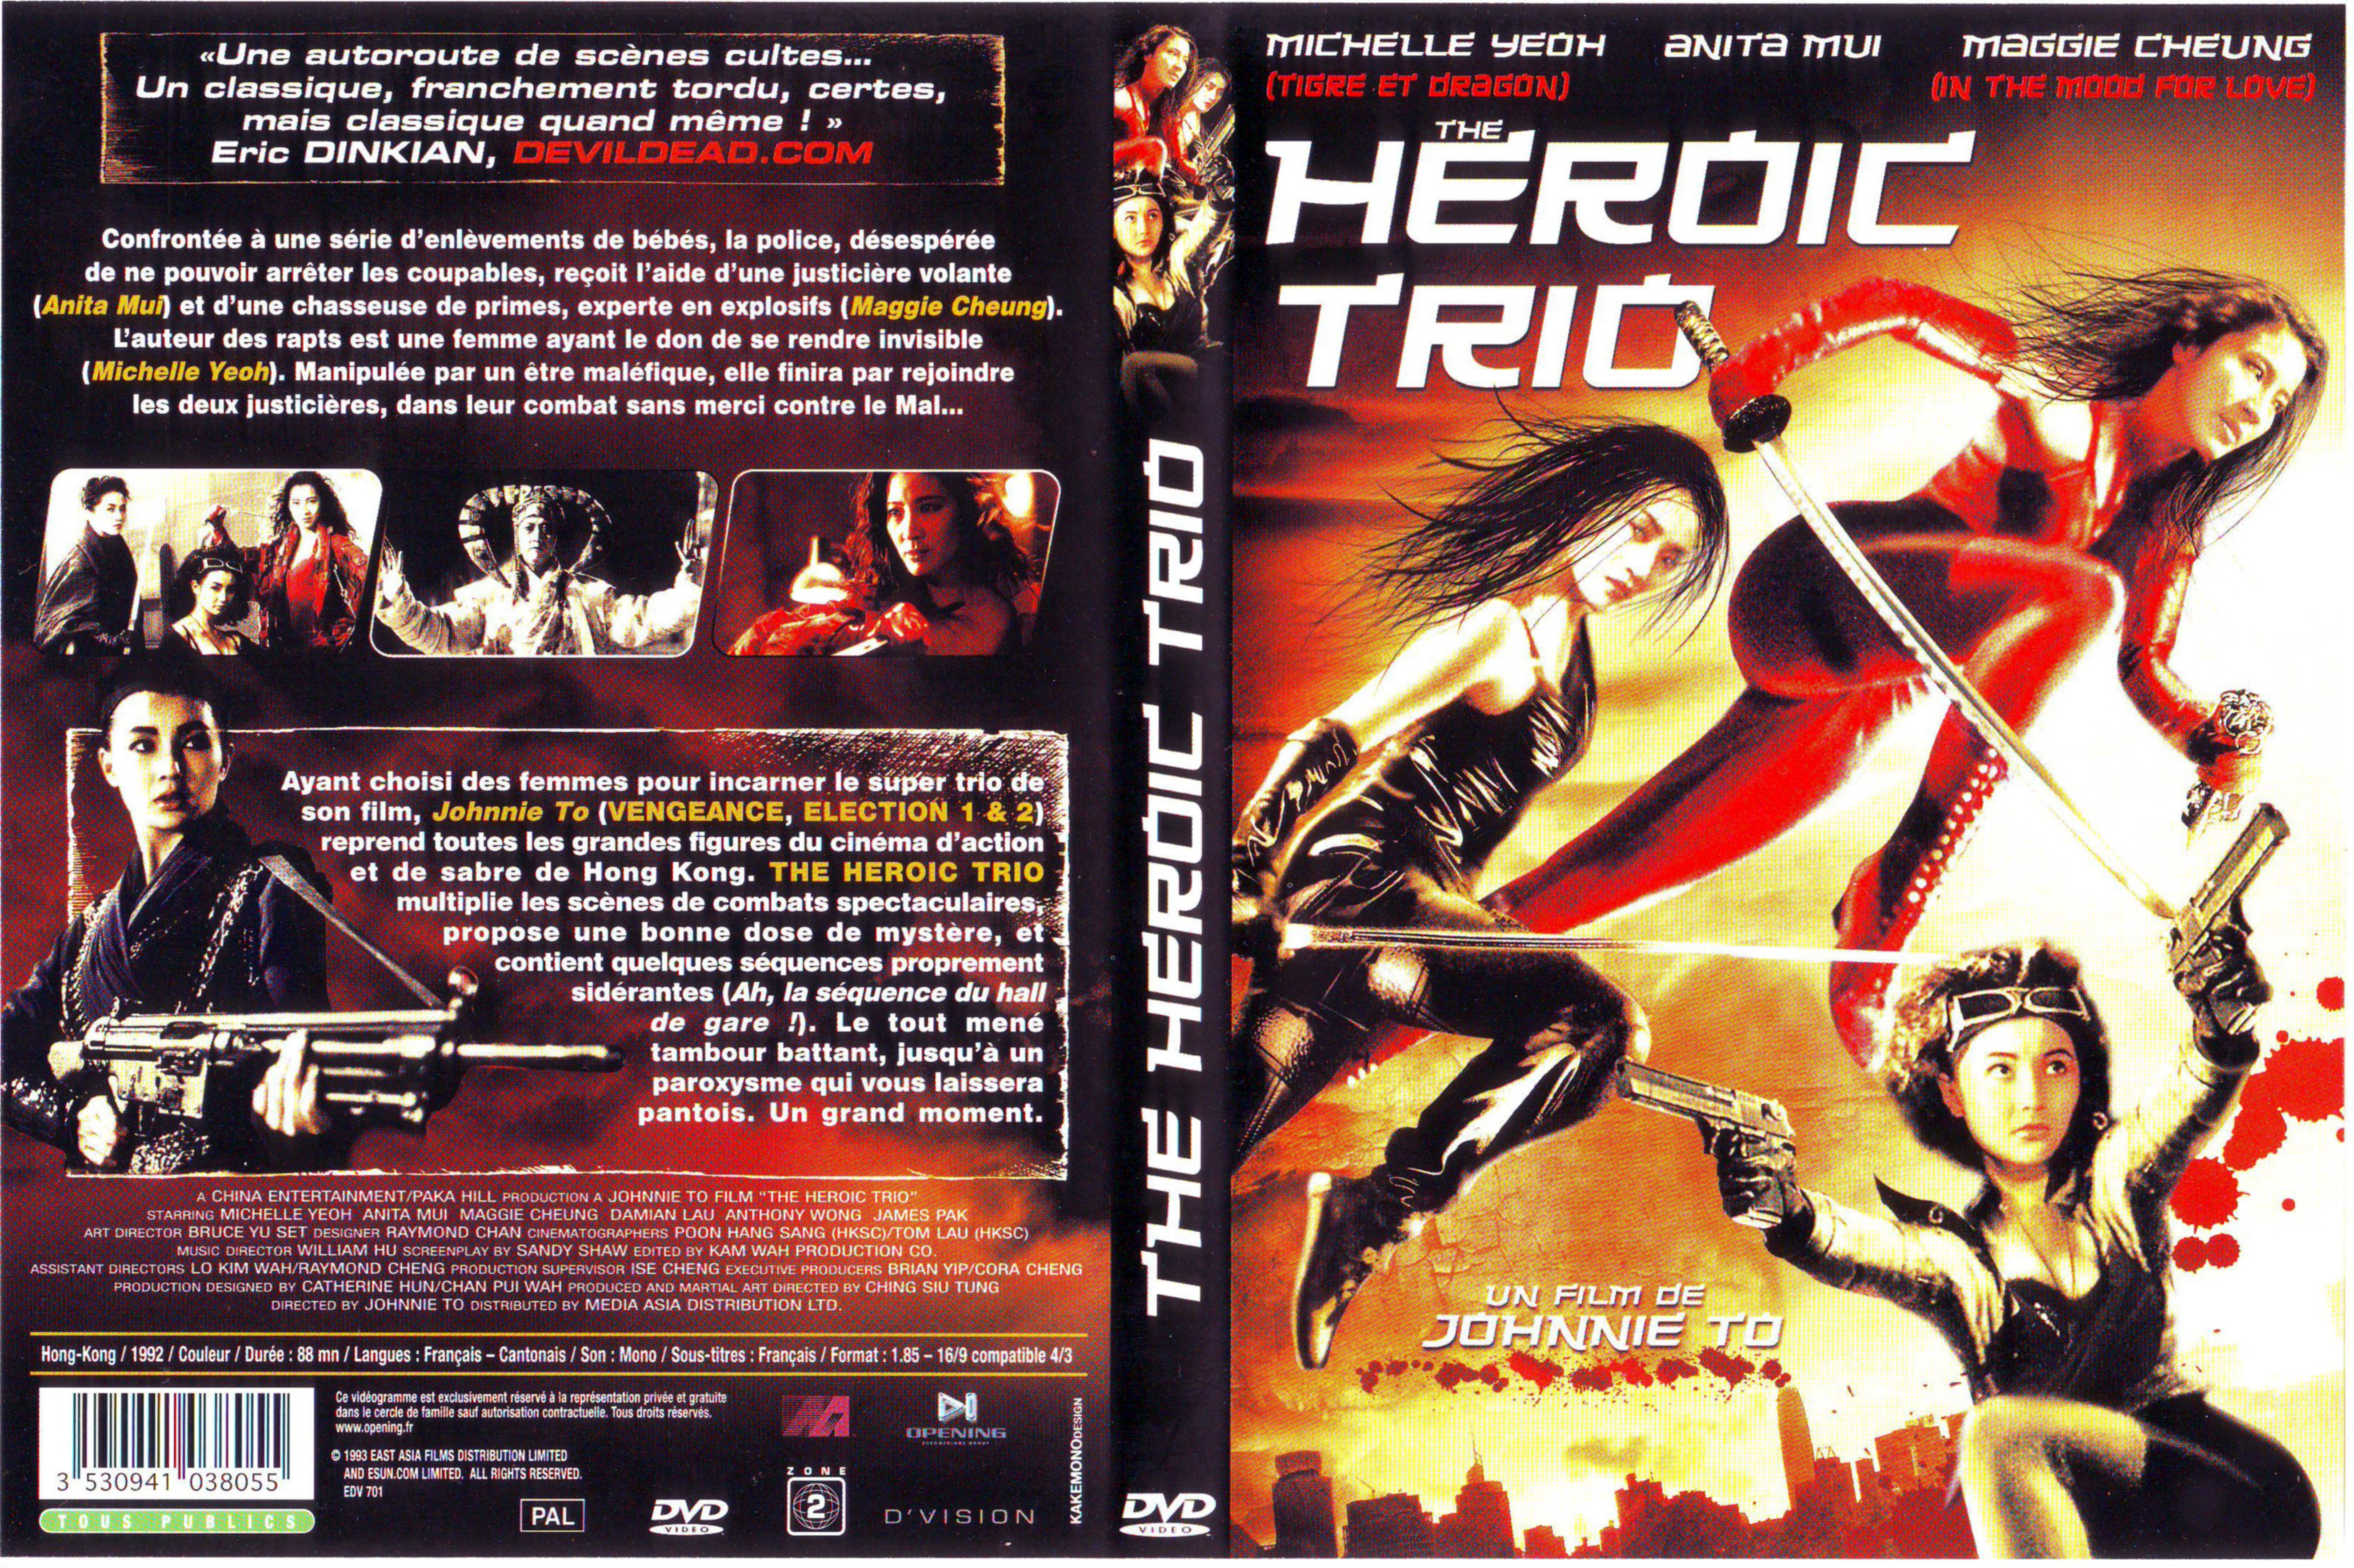 Jaquette DVD The heroic trio